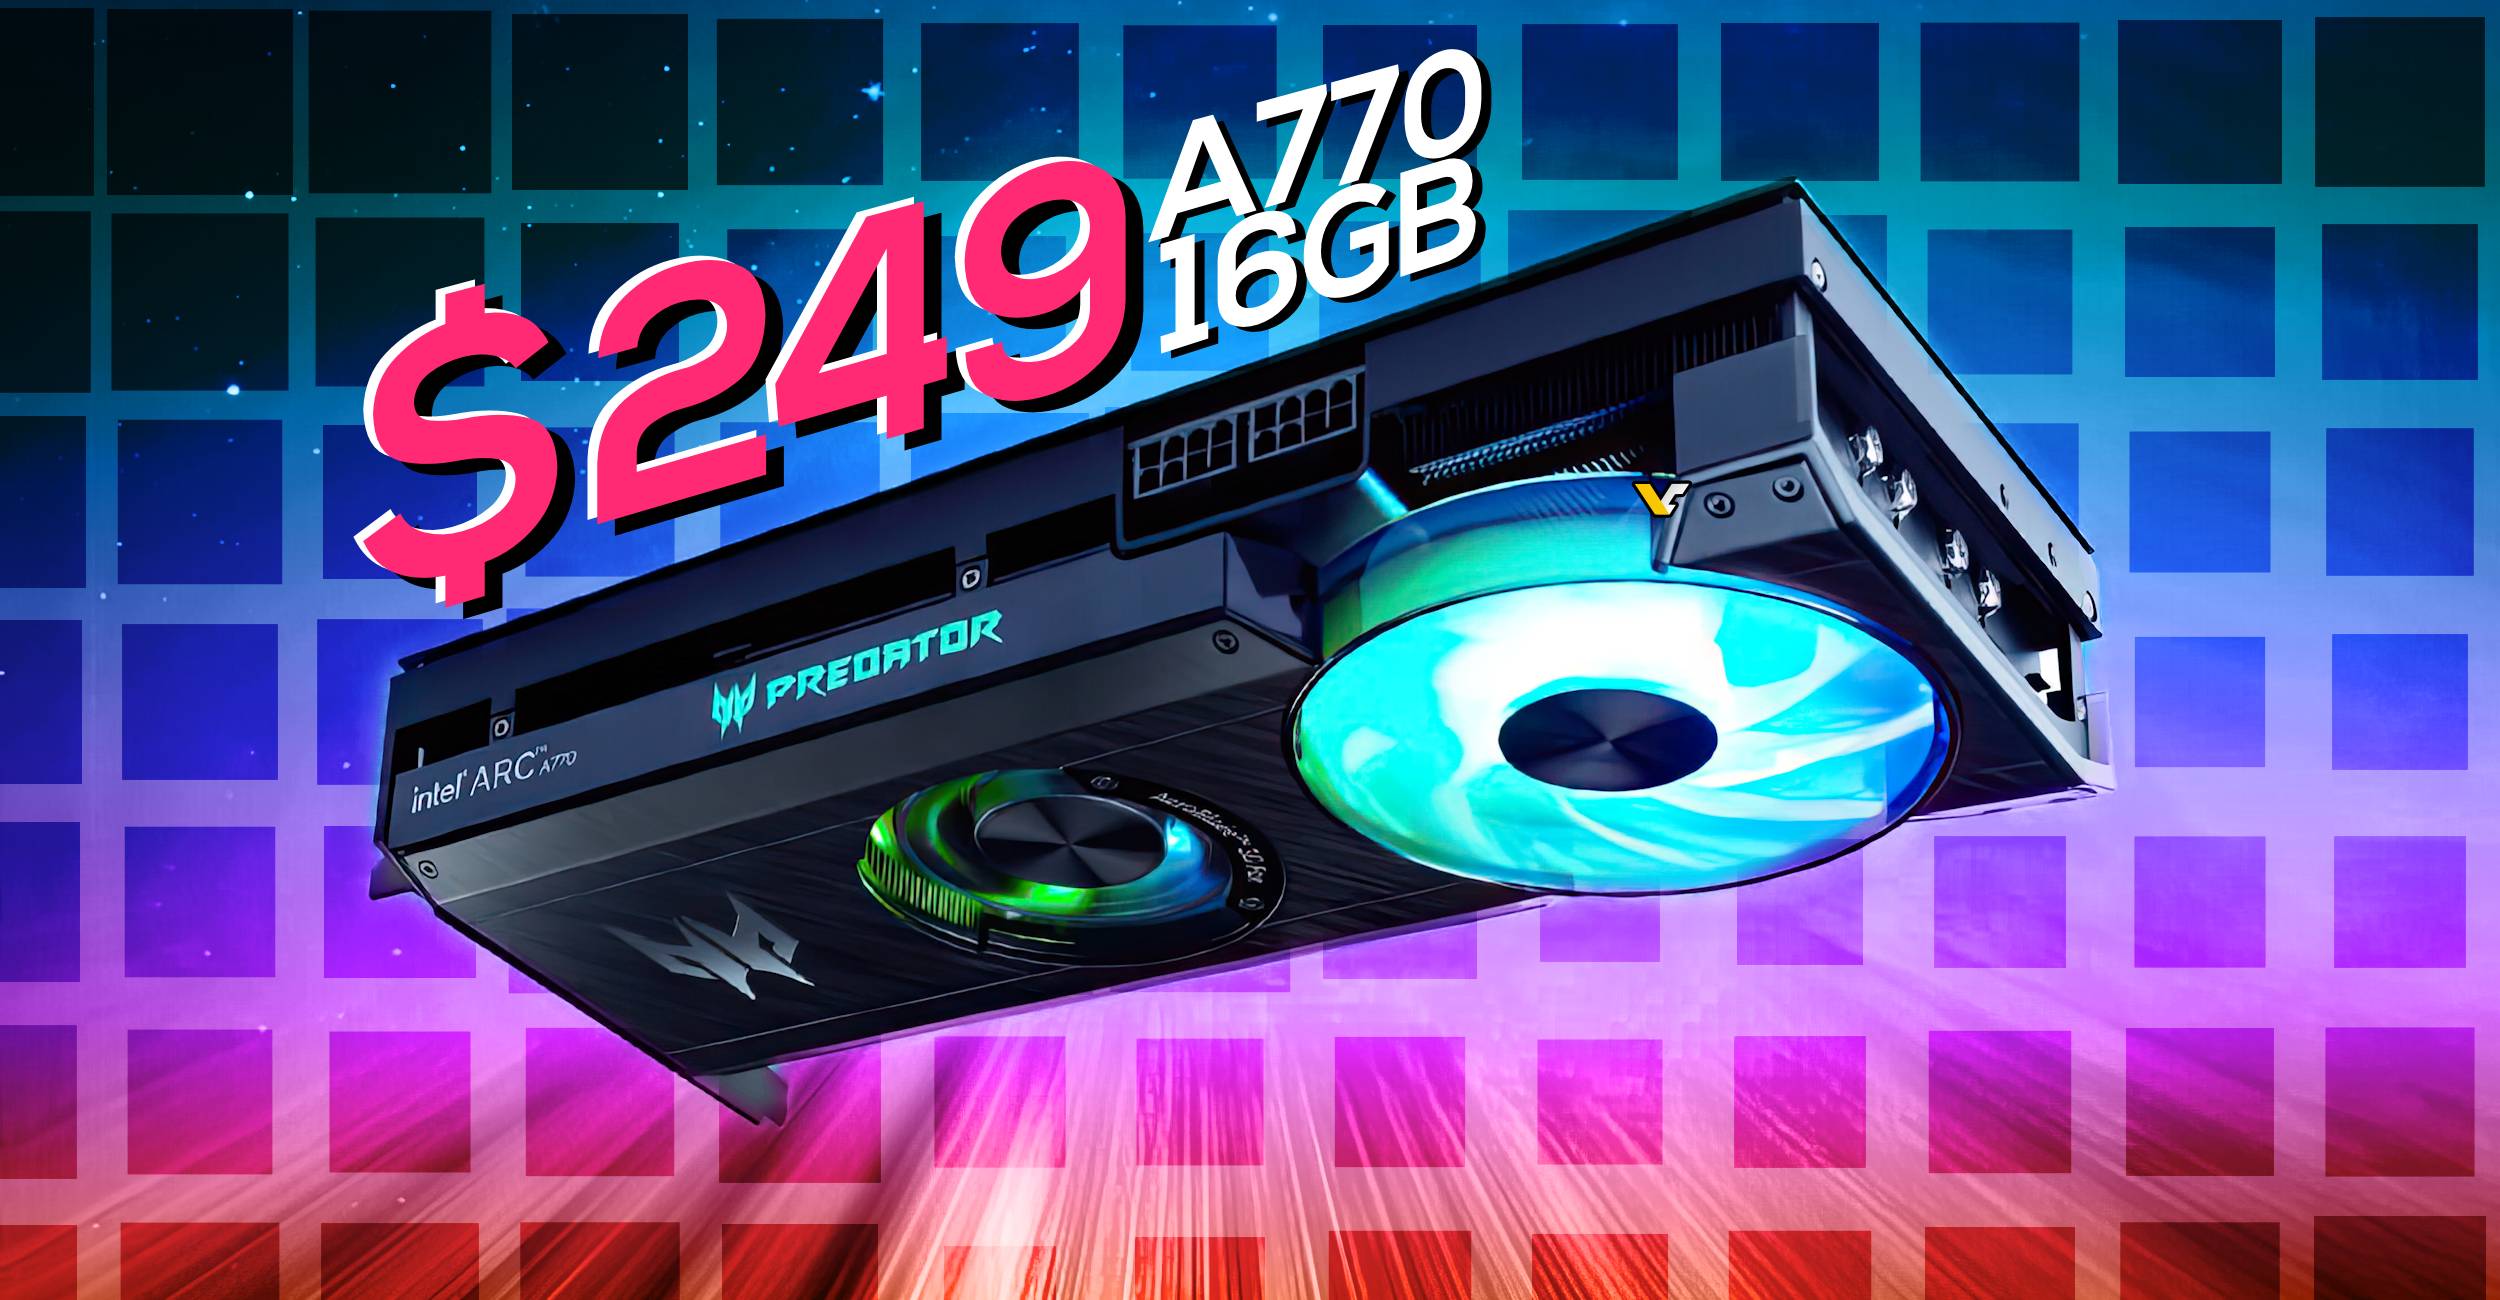 Intel Arc A770 GPU with 16GB now available for just $249, comes 